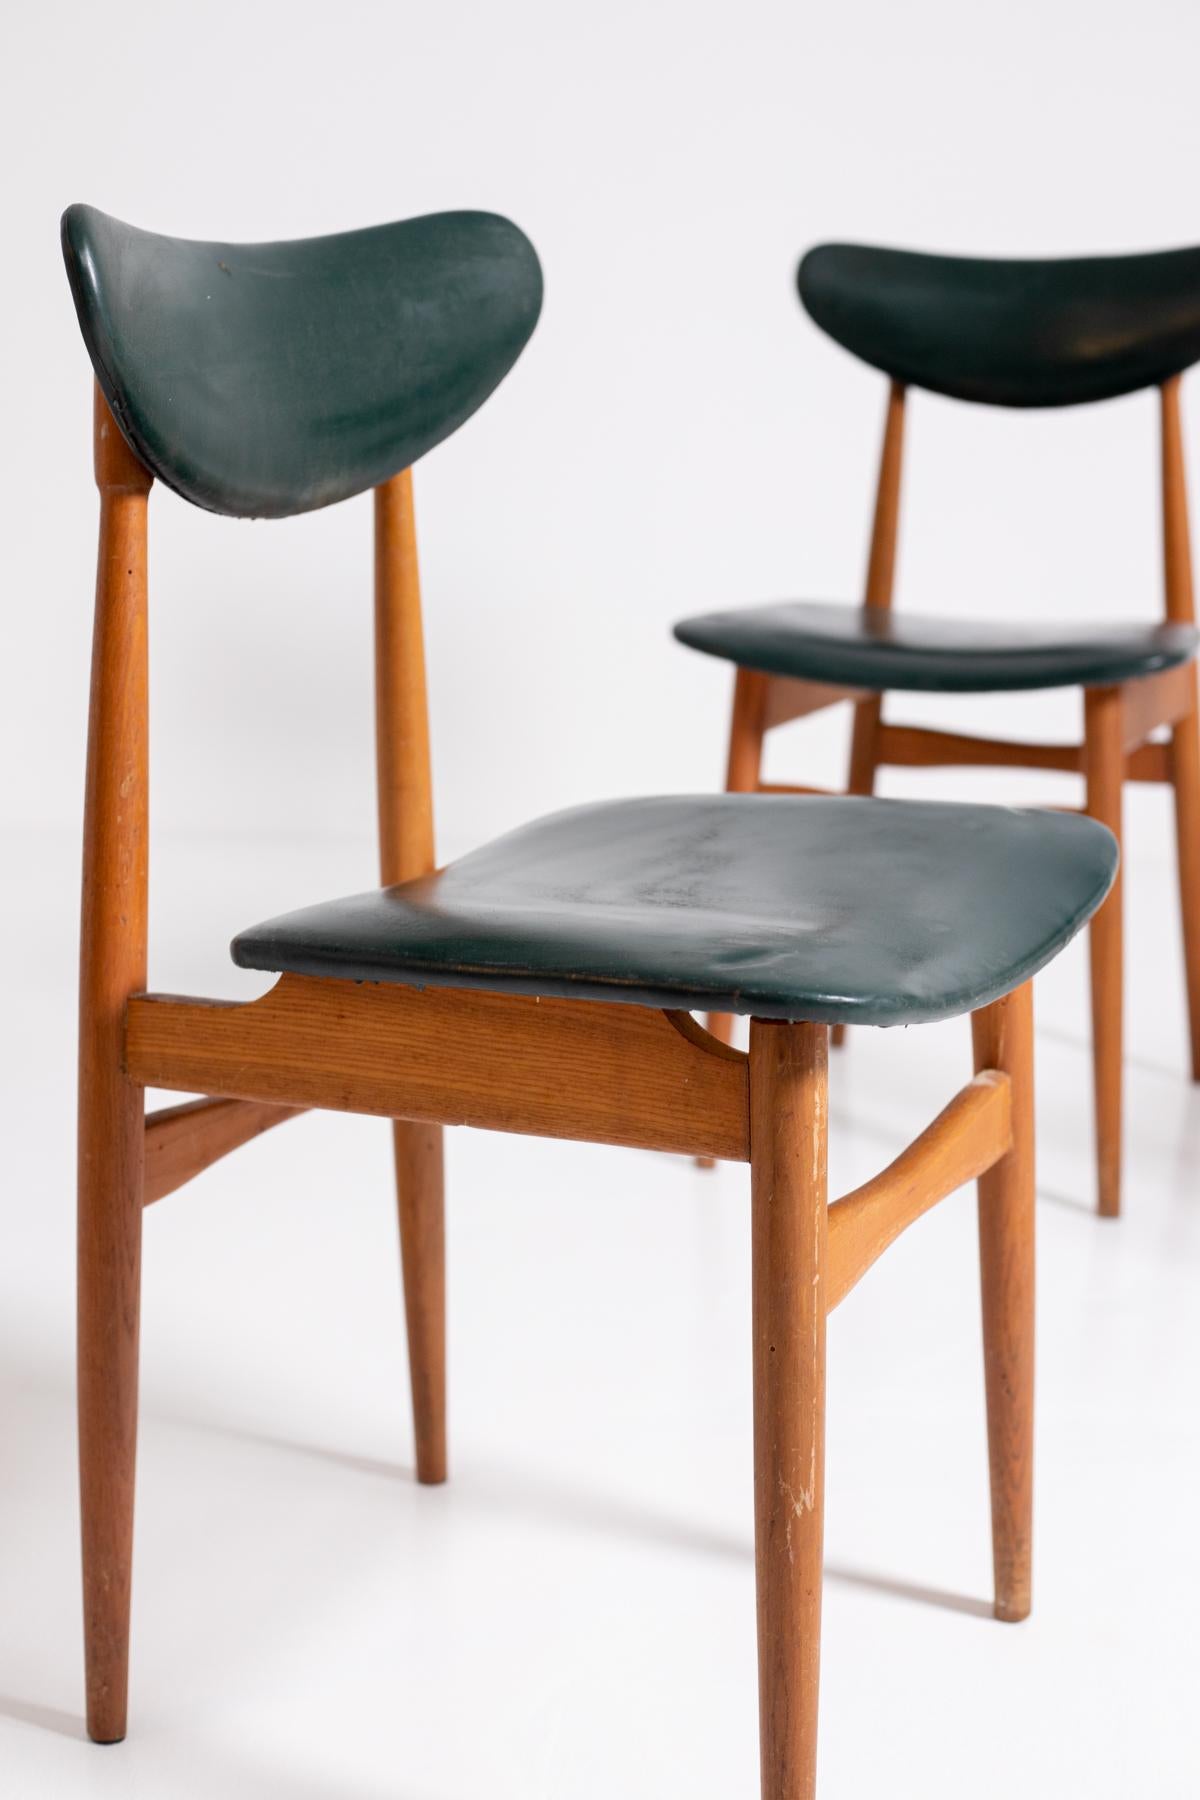 Mid-20th Century Set of Five Nordic Chairs in Green Leather and Wood, 1950s